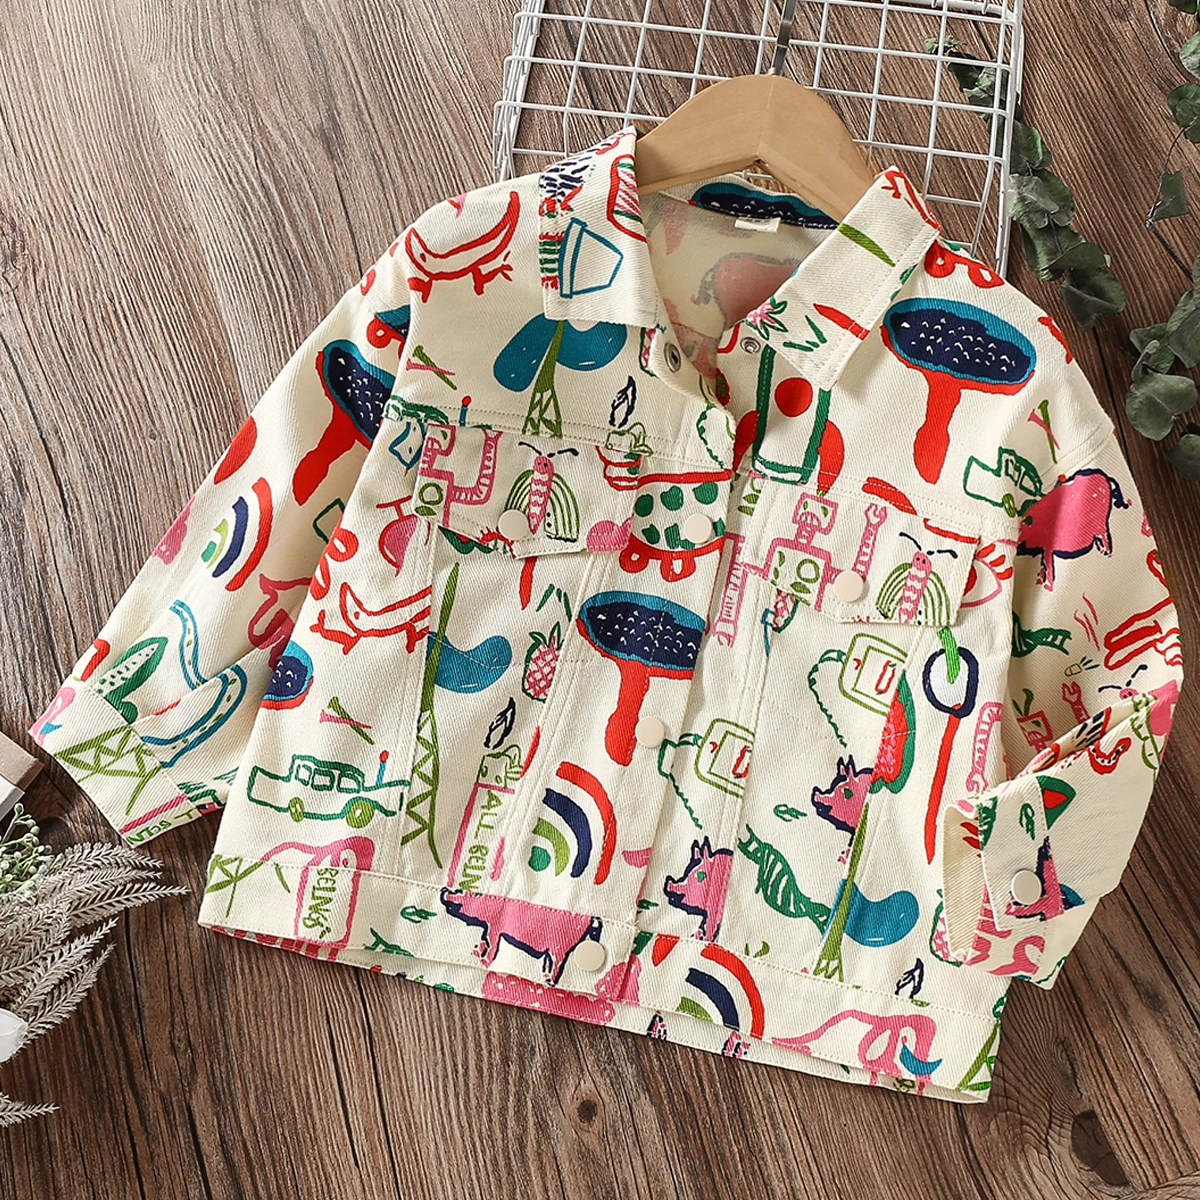 

Kids Denim Jacket for Girls Coats Spring Autumn Printed Outfits Children Outerwears Clothes for Teenagers Costumes 4 6 8 9 Years